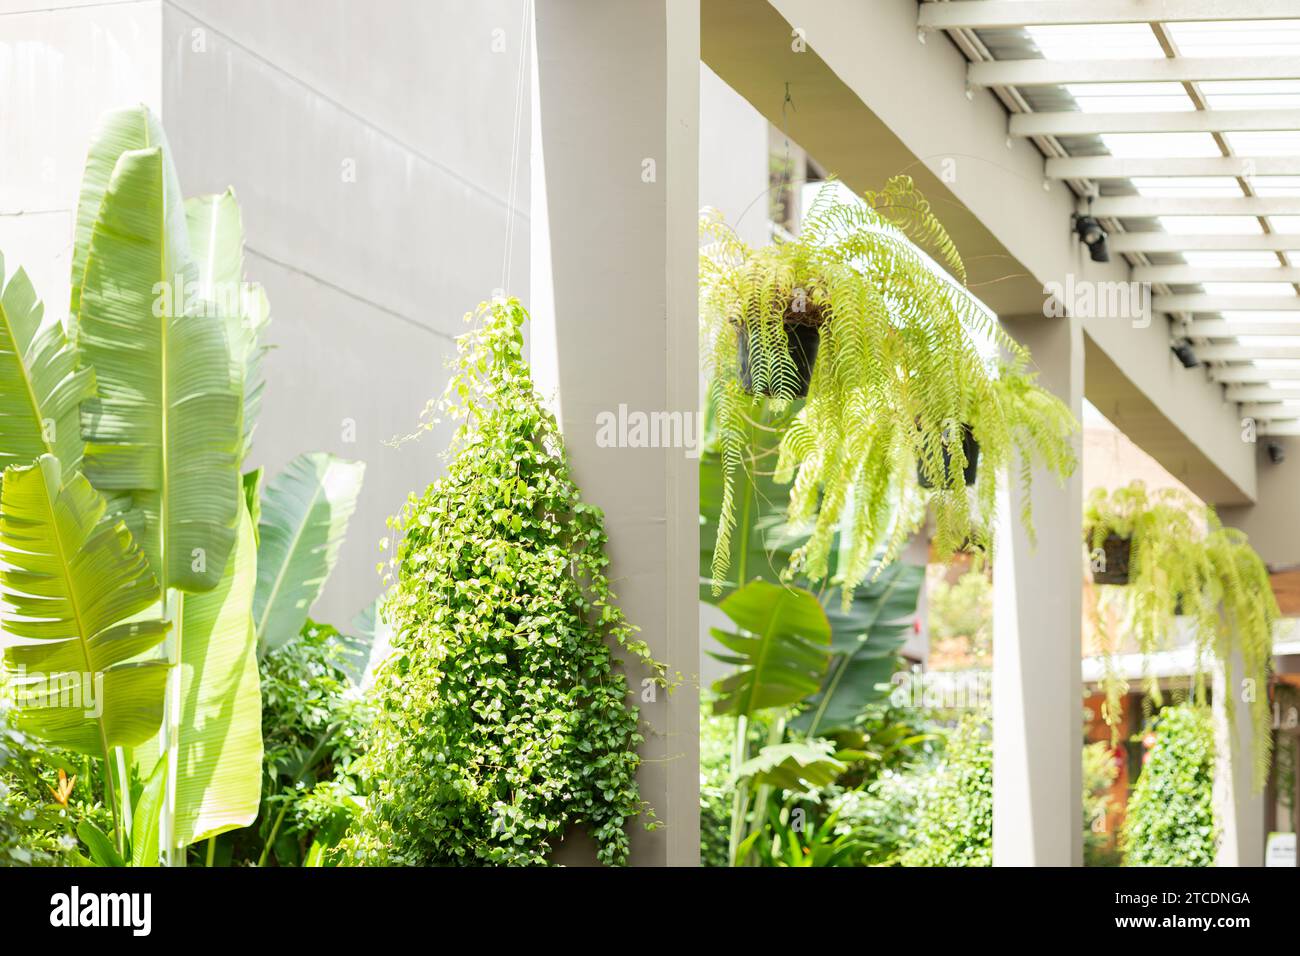 Green eco public space garden hallway building area with interior decorated with botany tree for saving energy refreshing cooling air and ozone. Stock Photo